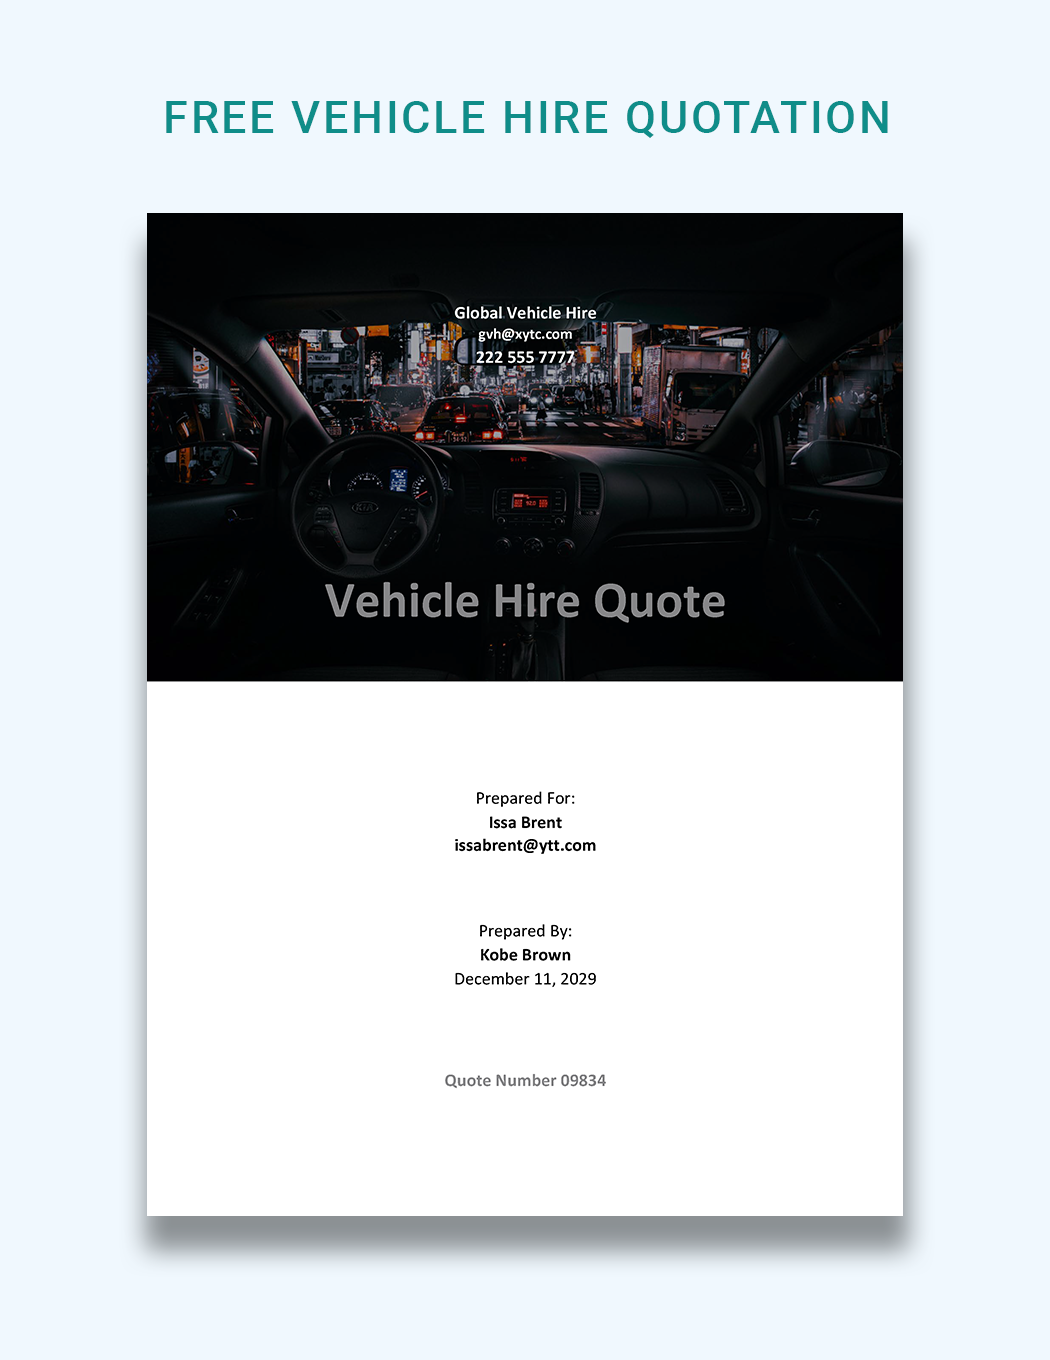 Vehicle Hire Quotation Template